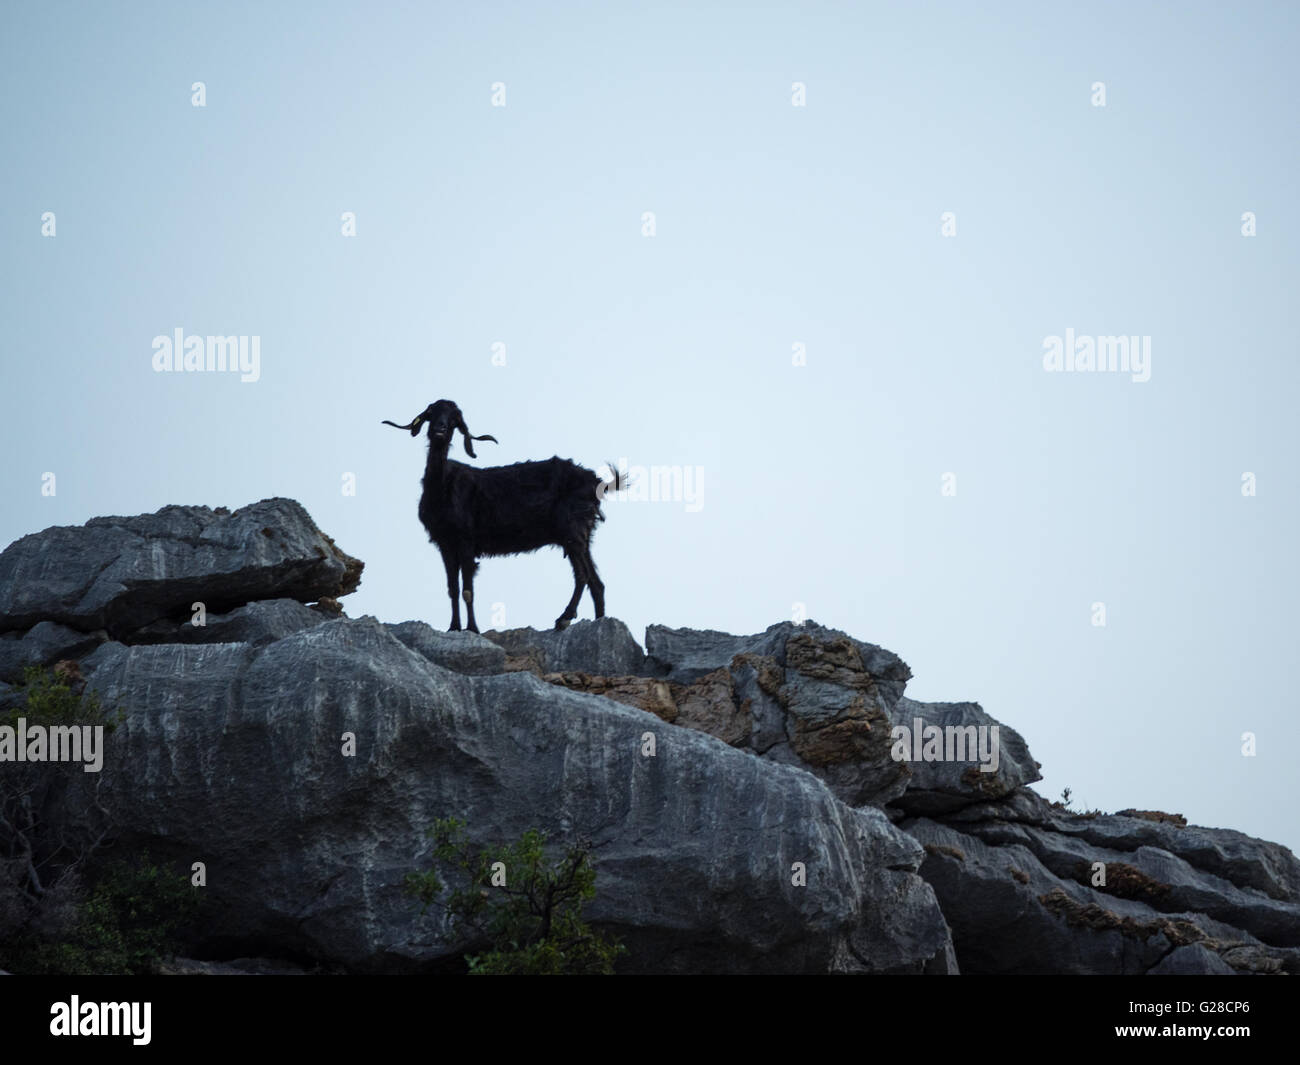 a silhouette of a goat on rocky mountain hill ridge against a clear blue sky, Turkey Stock Photo